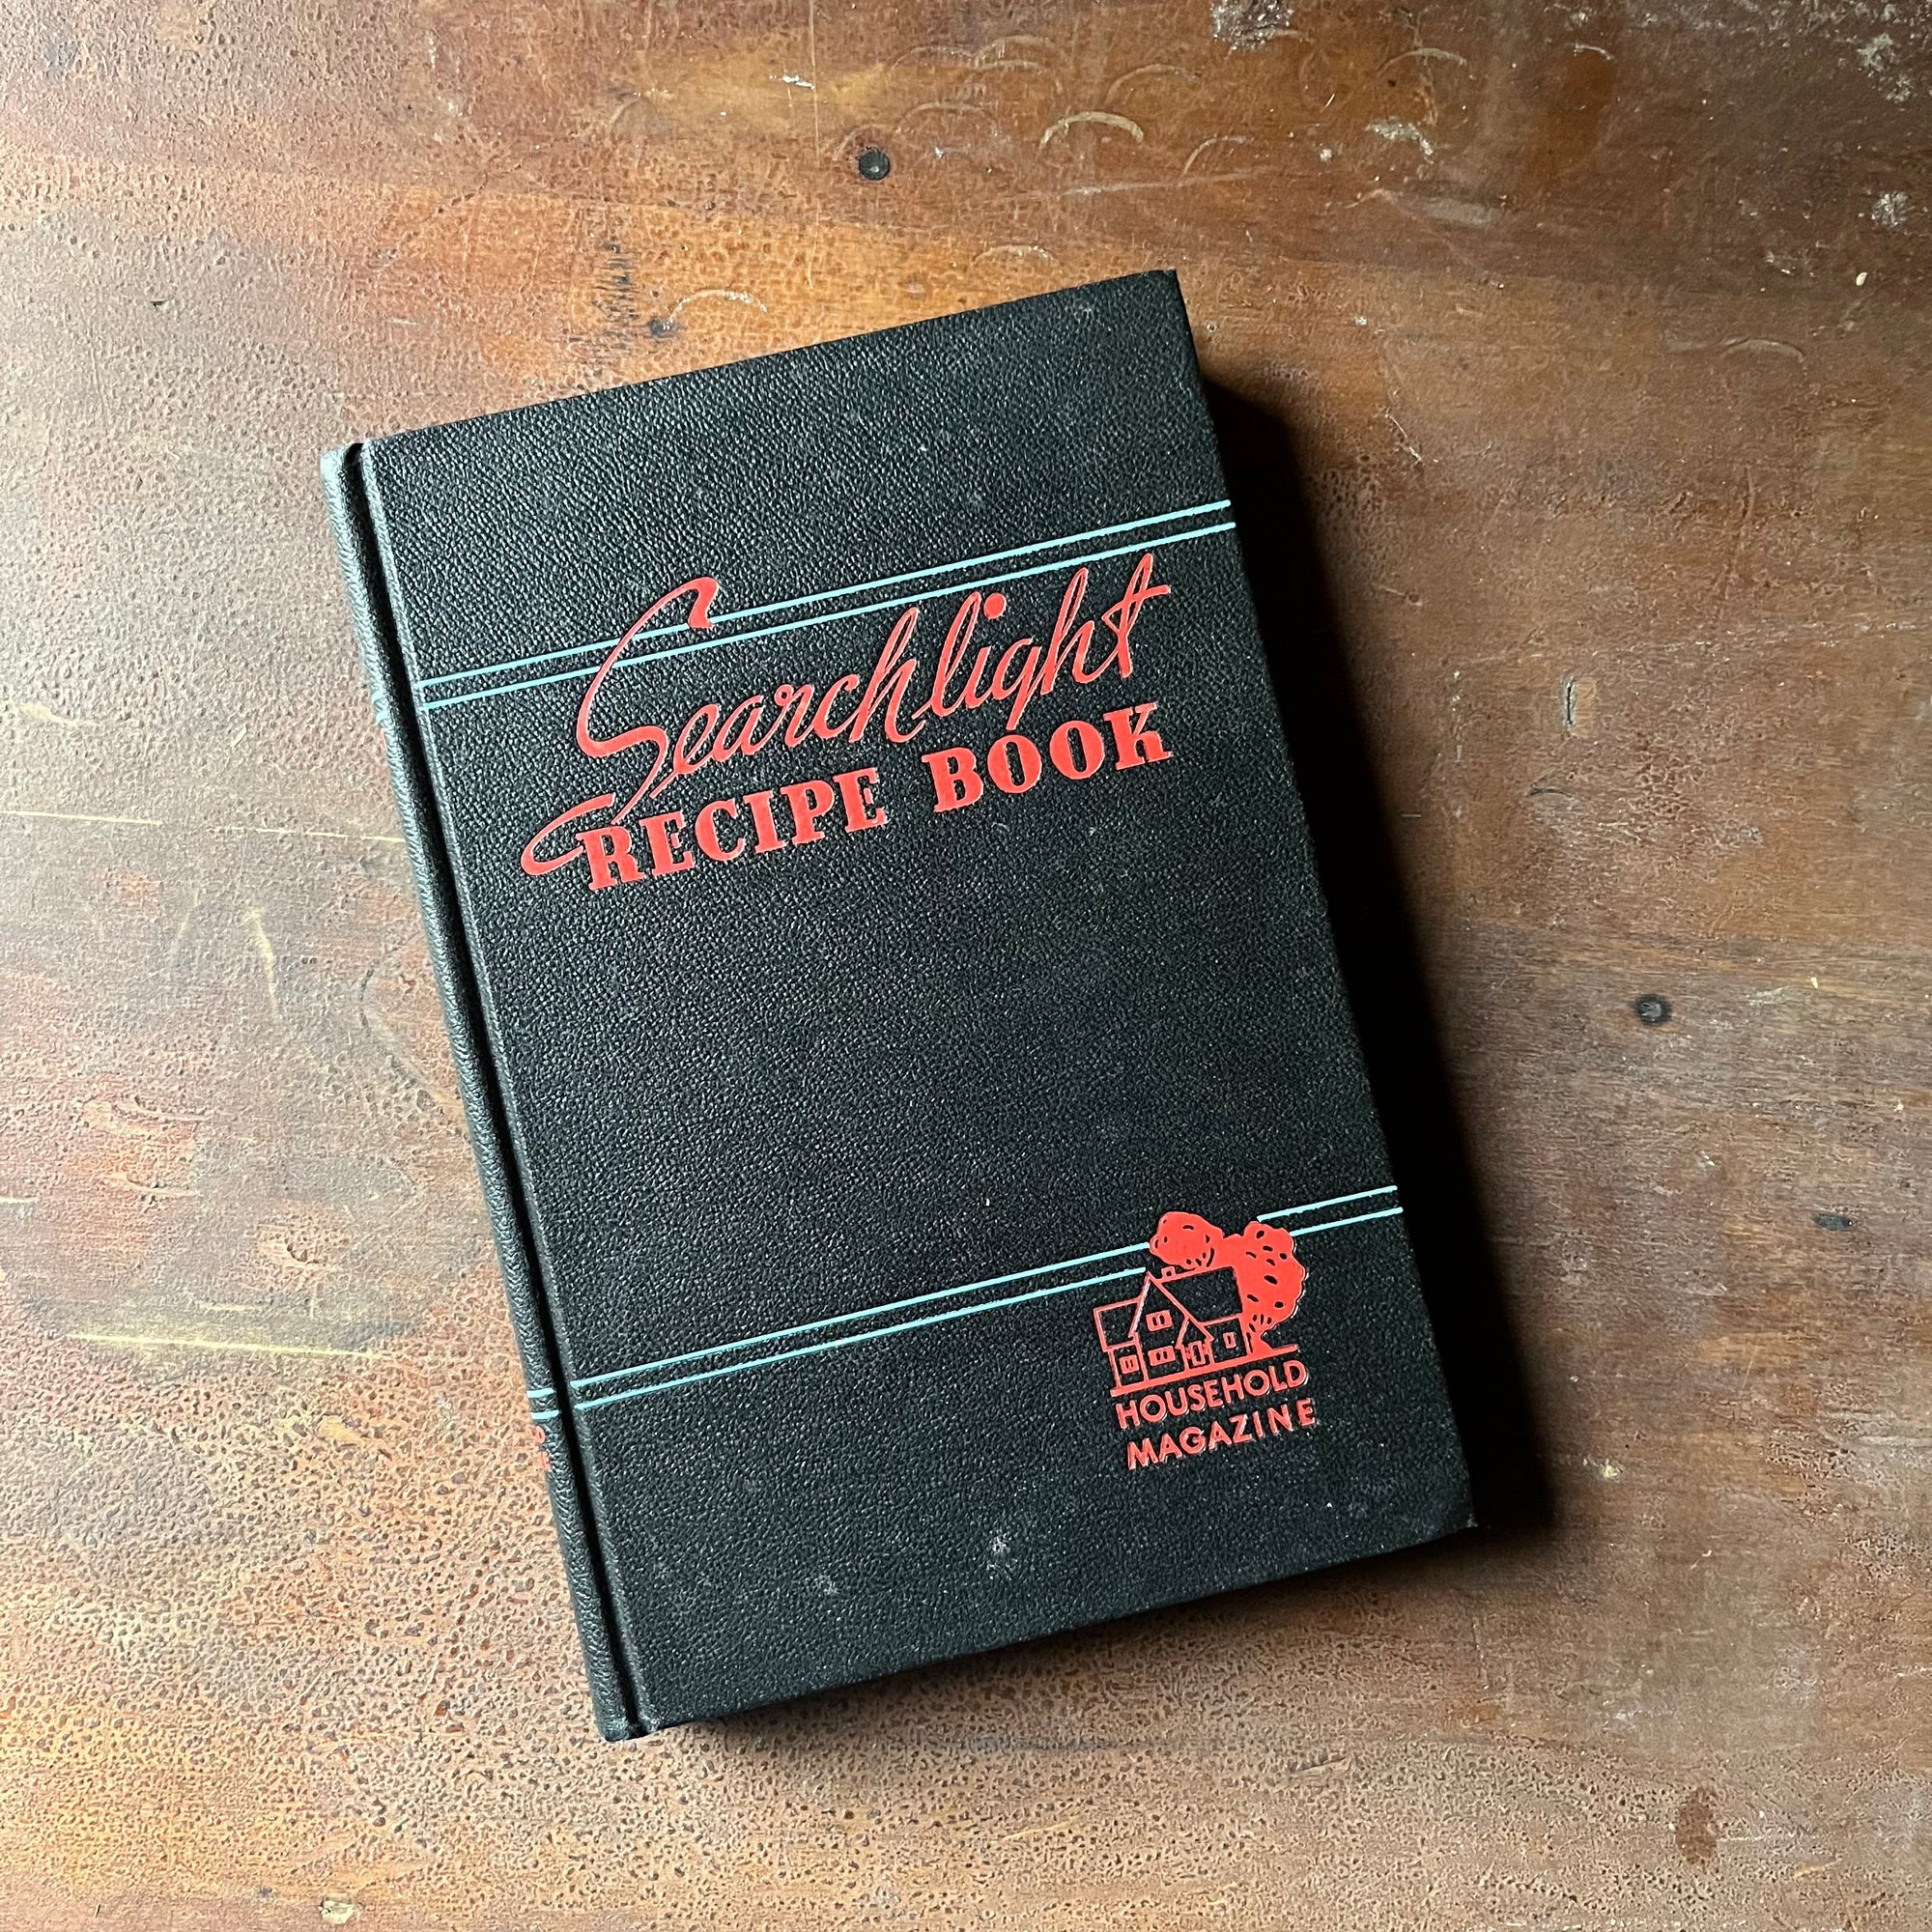 Searchlight Recipe Book - 1947 Edition - Cookbook  - view of the front cover